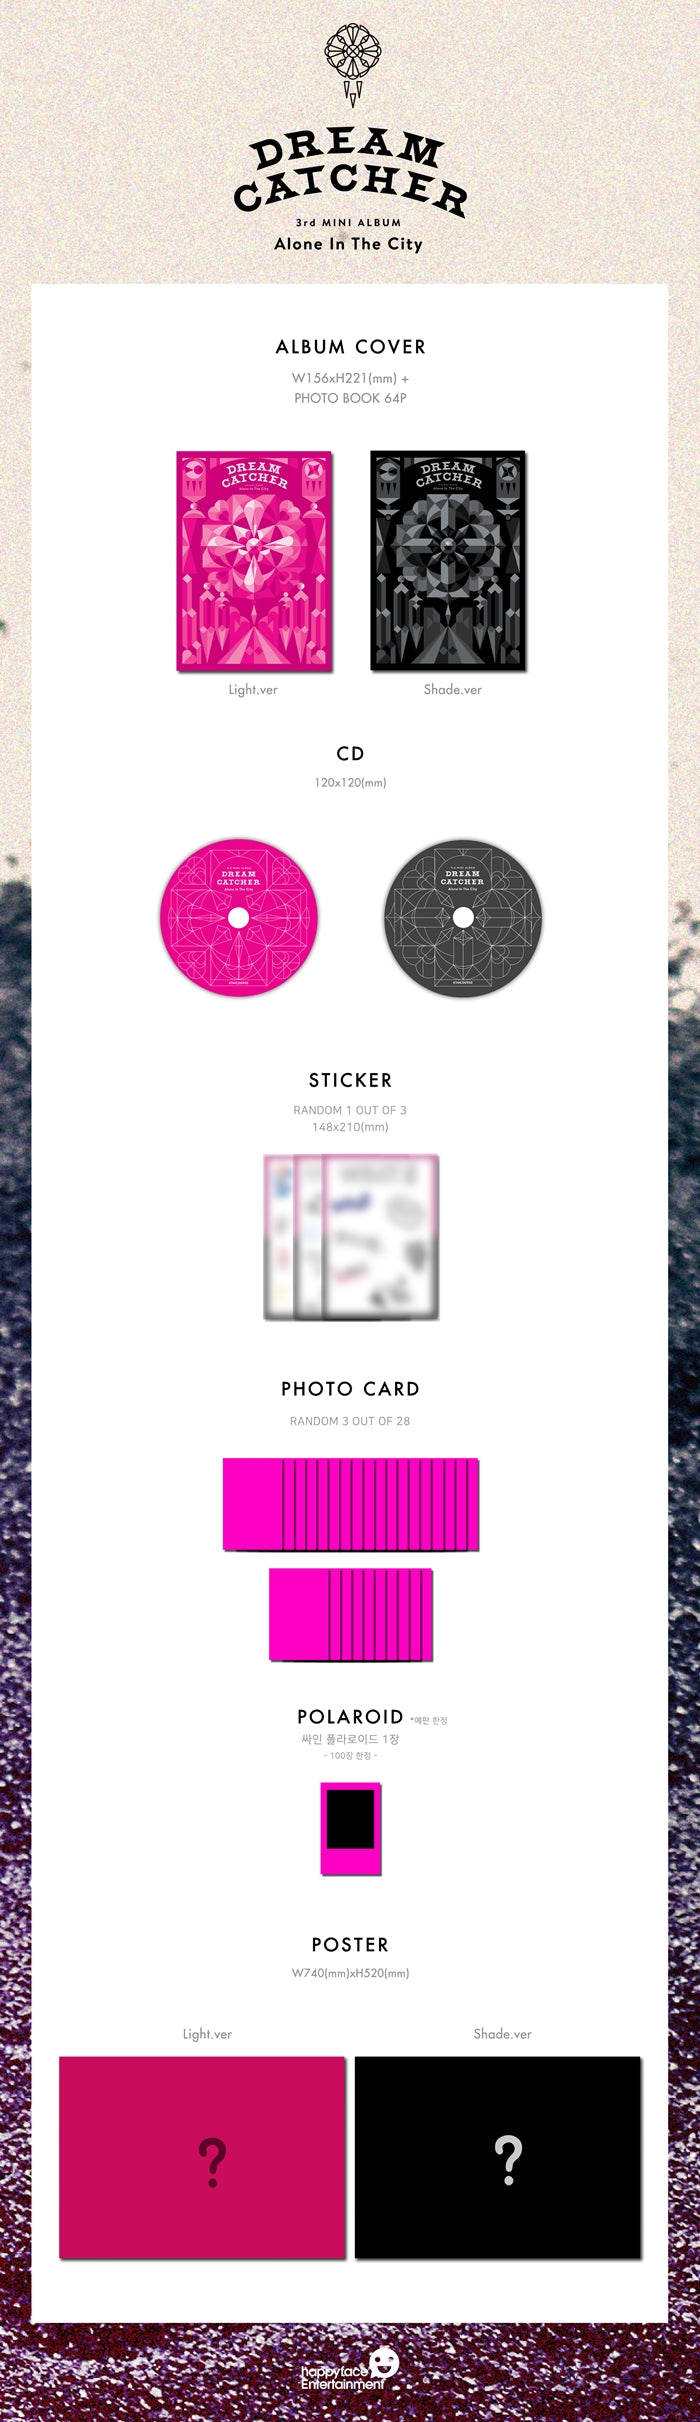 1 CD
1 Sticker (random out of 3 types)
3 Photo Cards (random out of 28 types)